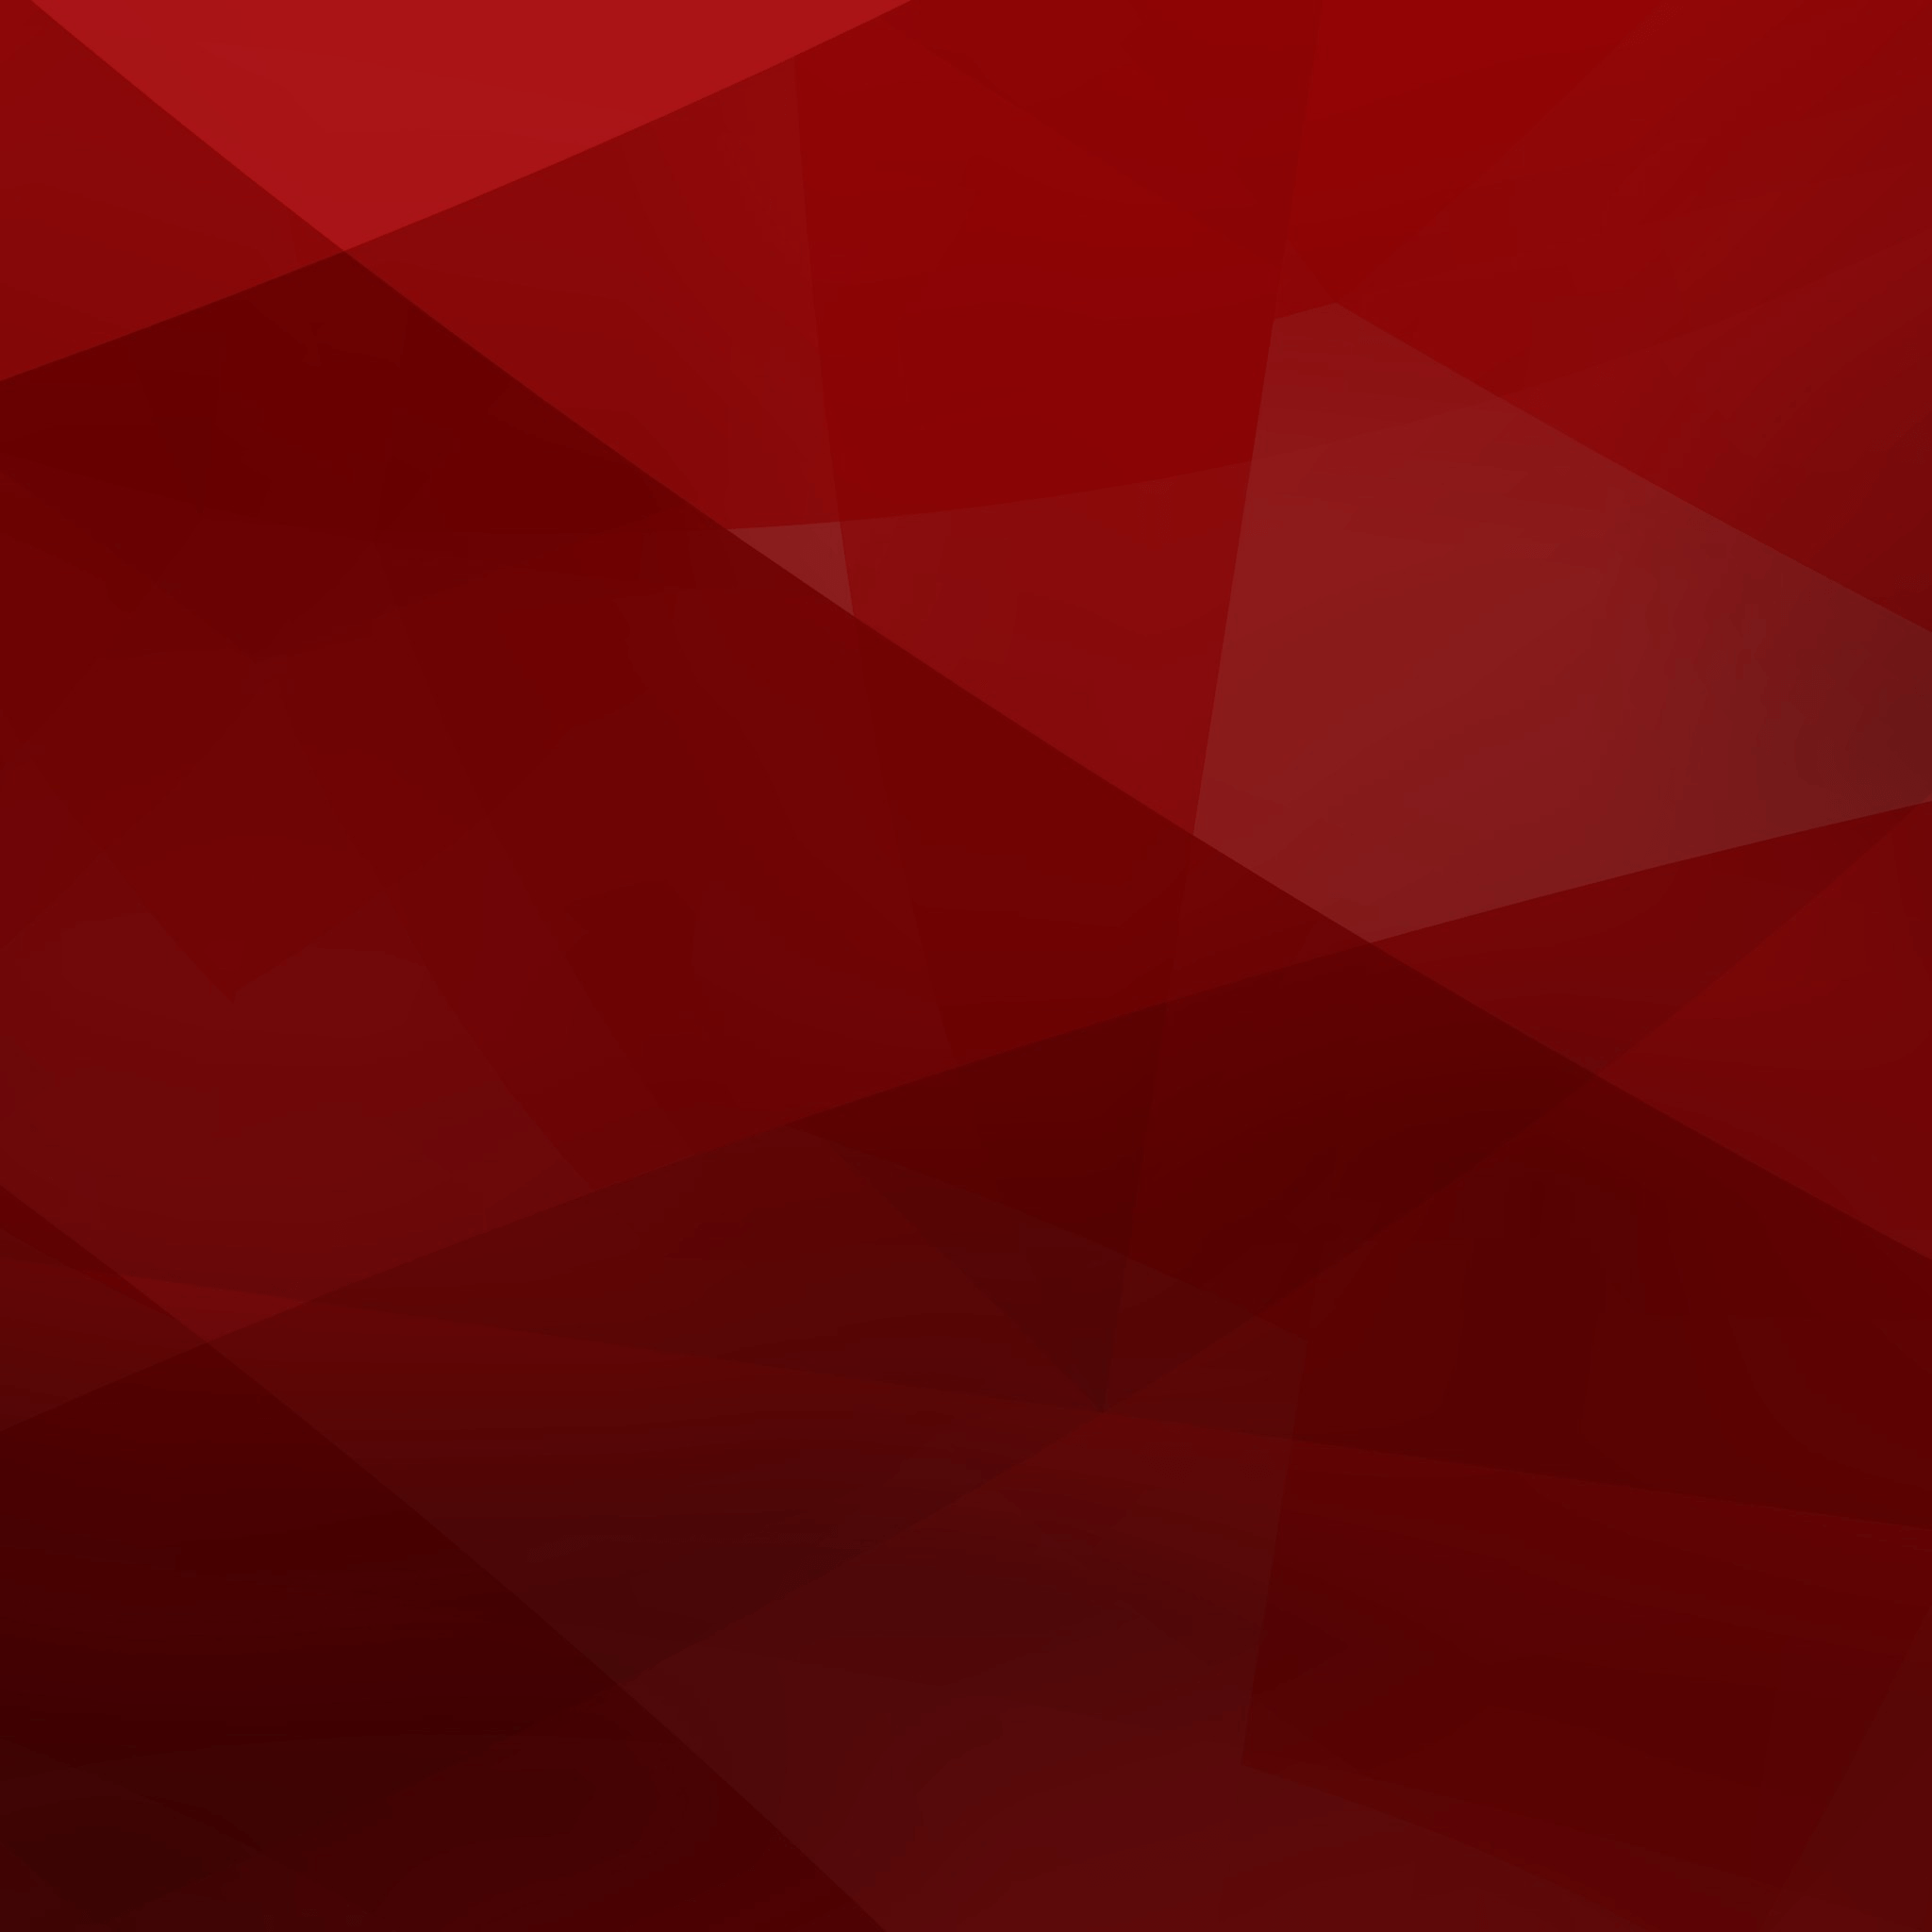 Red Color Red Color HD Free Wallpaper Background Image FHD 4k